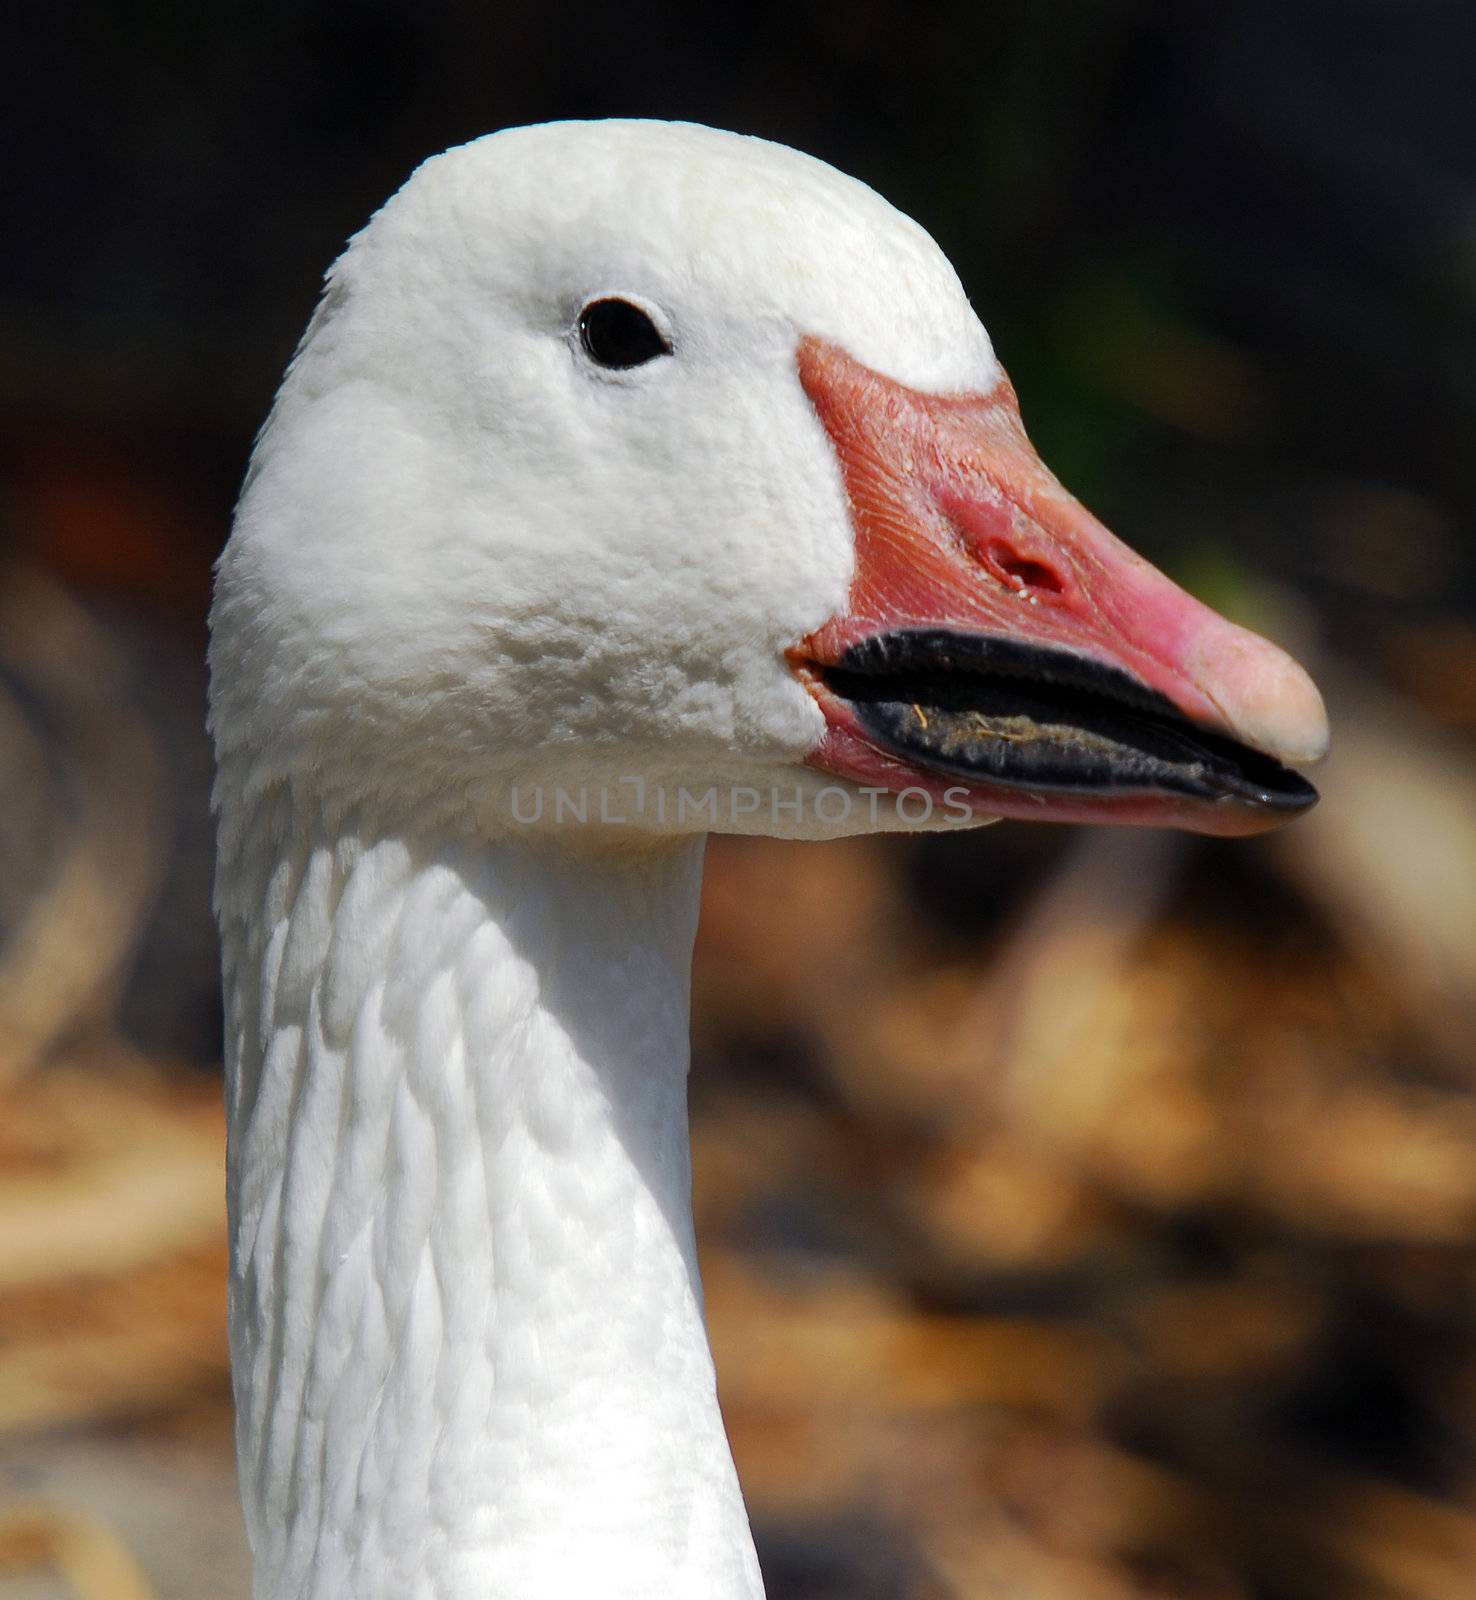 Portrait of a white goose with afunny beak